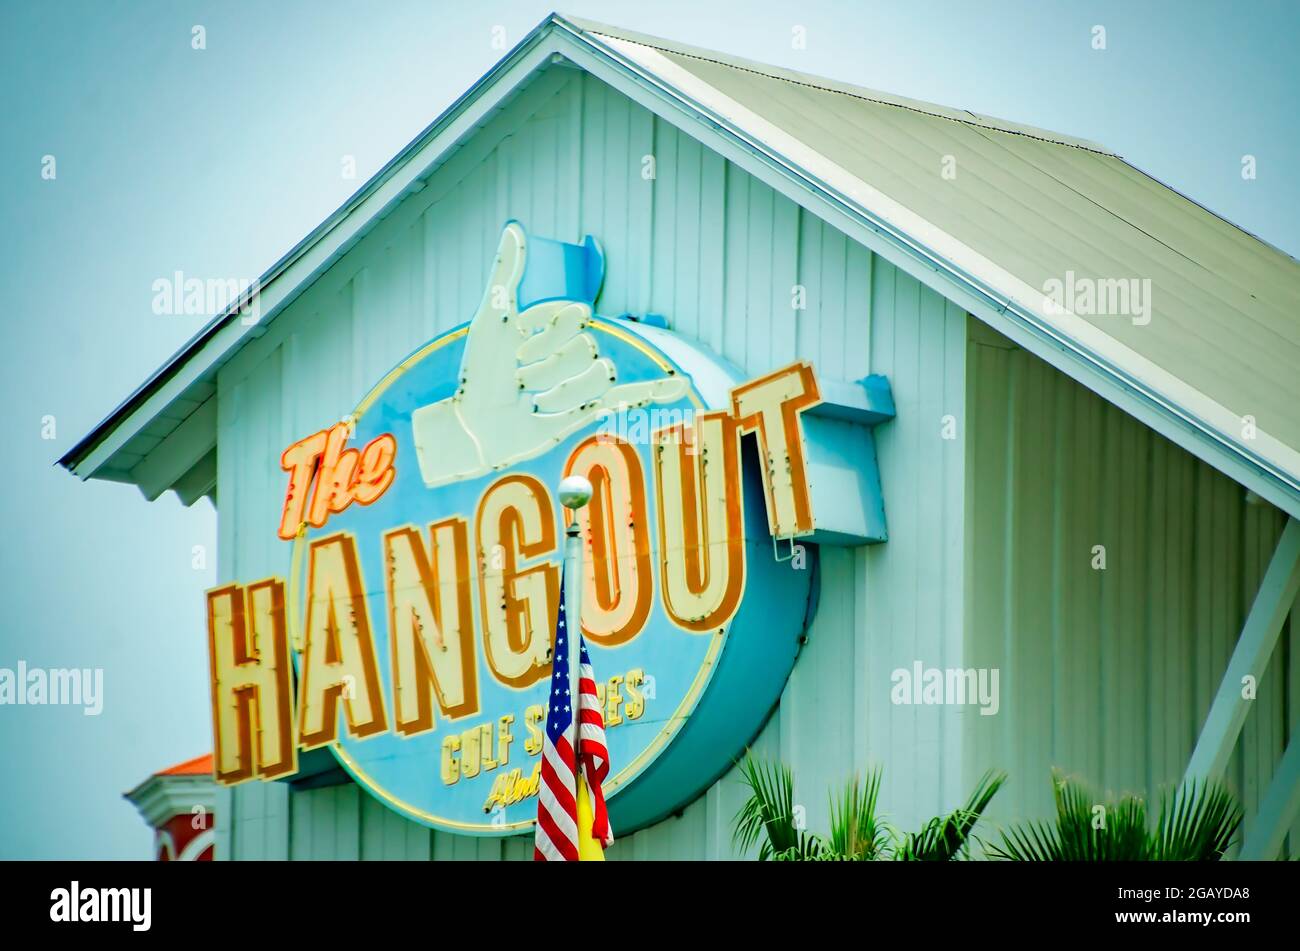 The Hangout restaurant is pictured, July 31, 2021, in Gulf Shores, Alabama. The Hangout offers food, live music, and events. Stock Photo